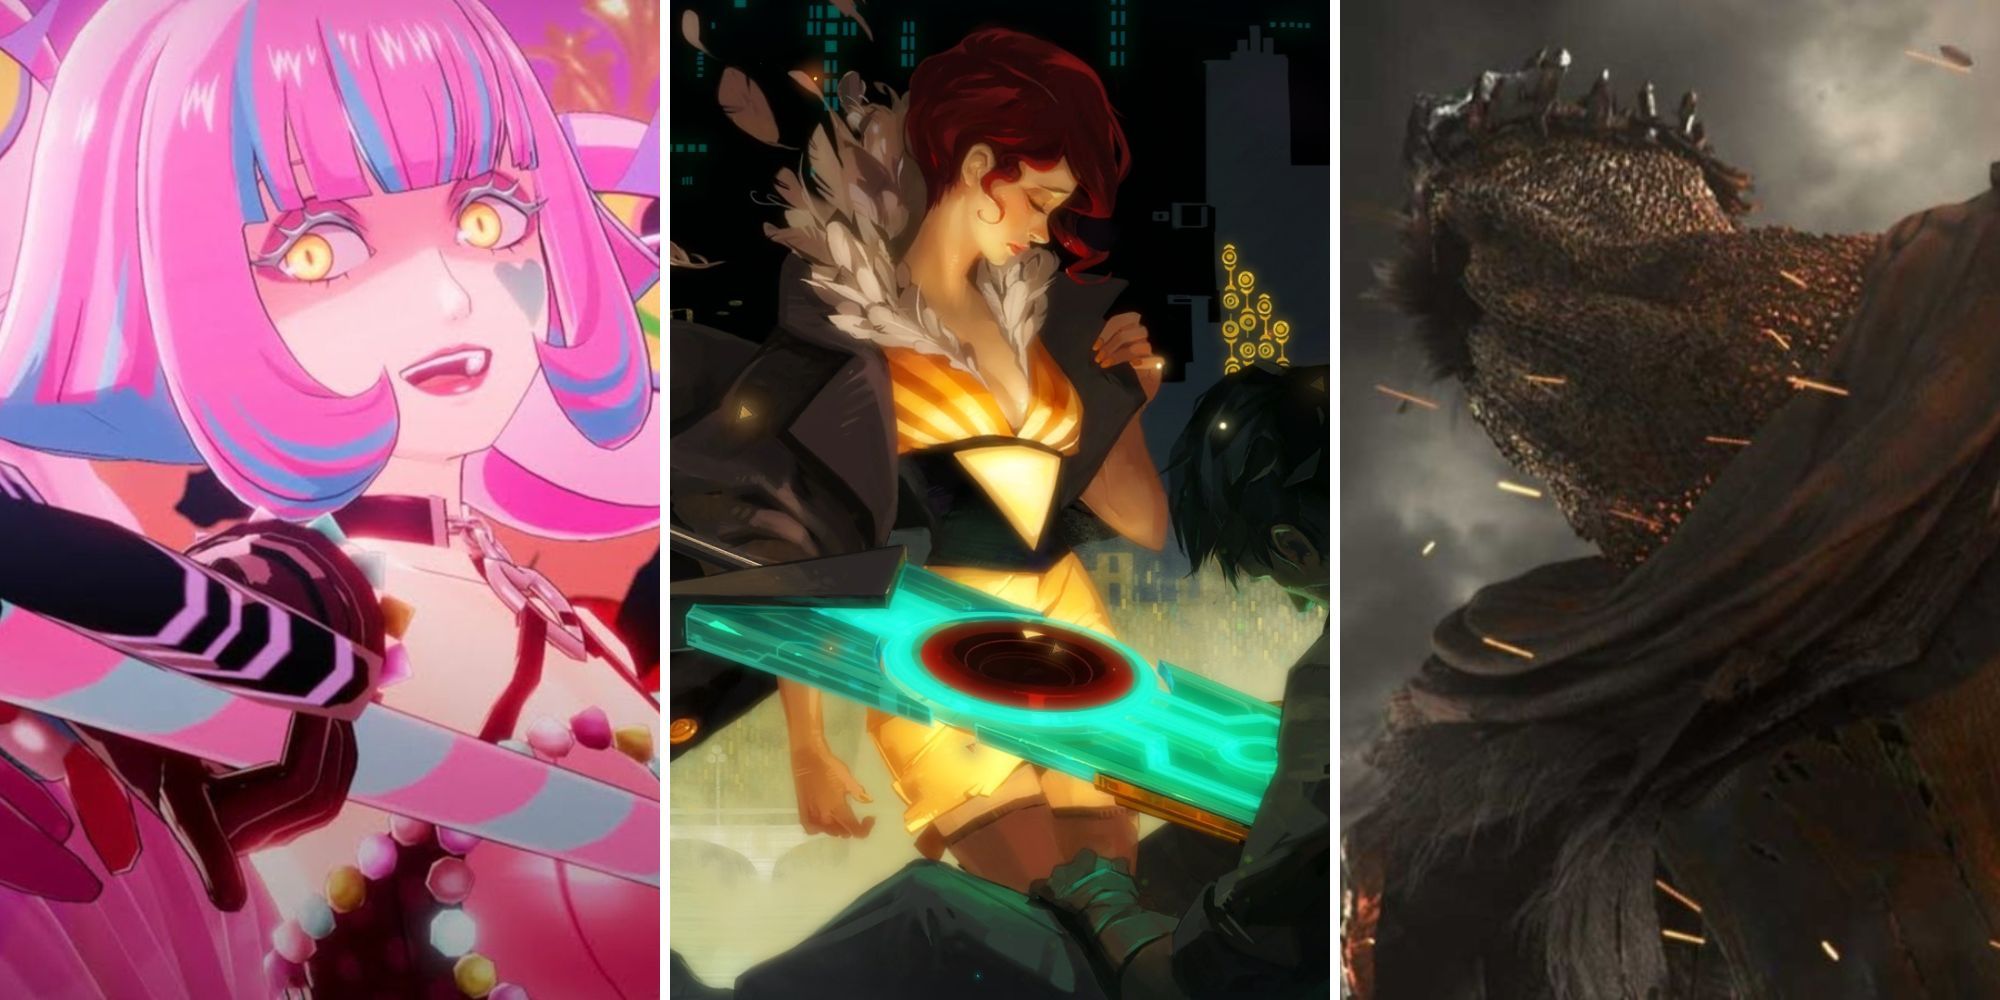 A grid showing the three RPGs Persona 5 Strikers, Transistor, and Dark Souls 3